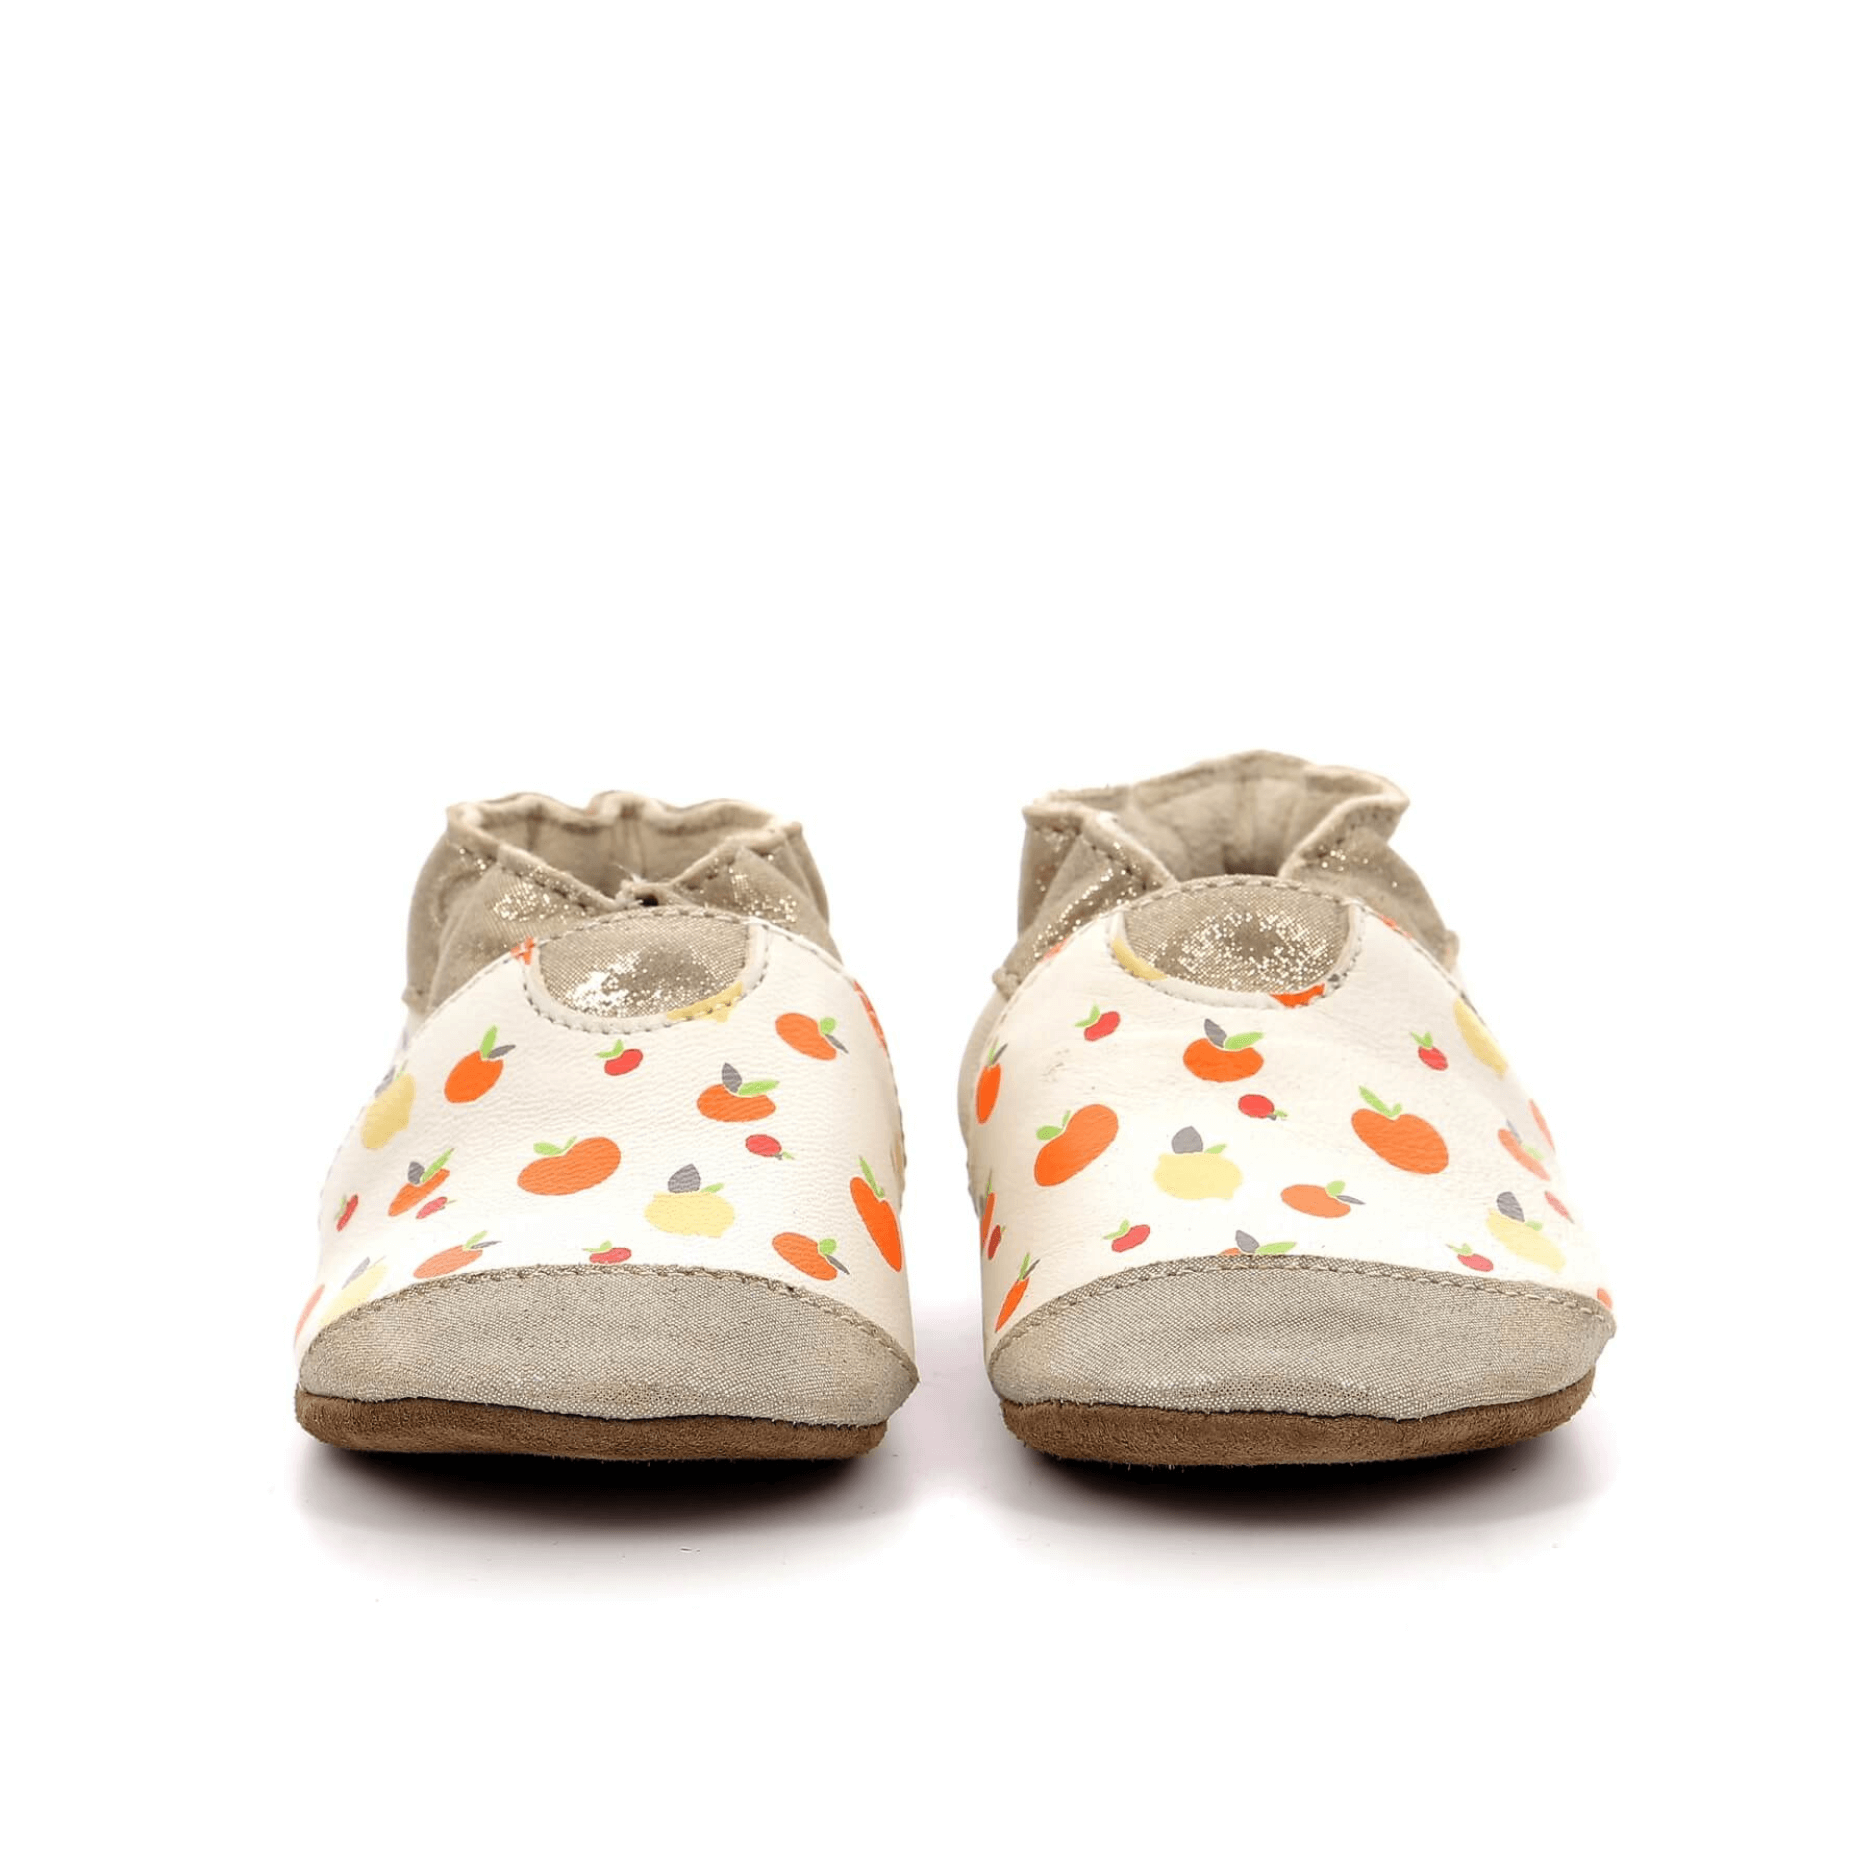 ROBEEZ Chaussons Summer Juice Or Beige ma petite pointure 